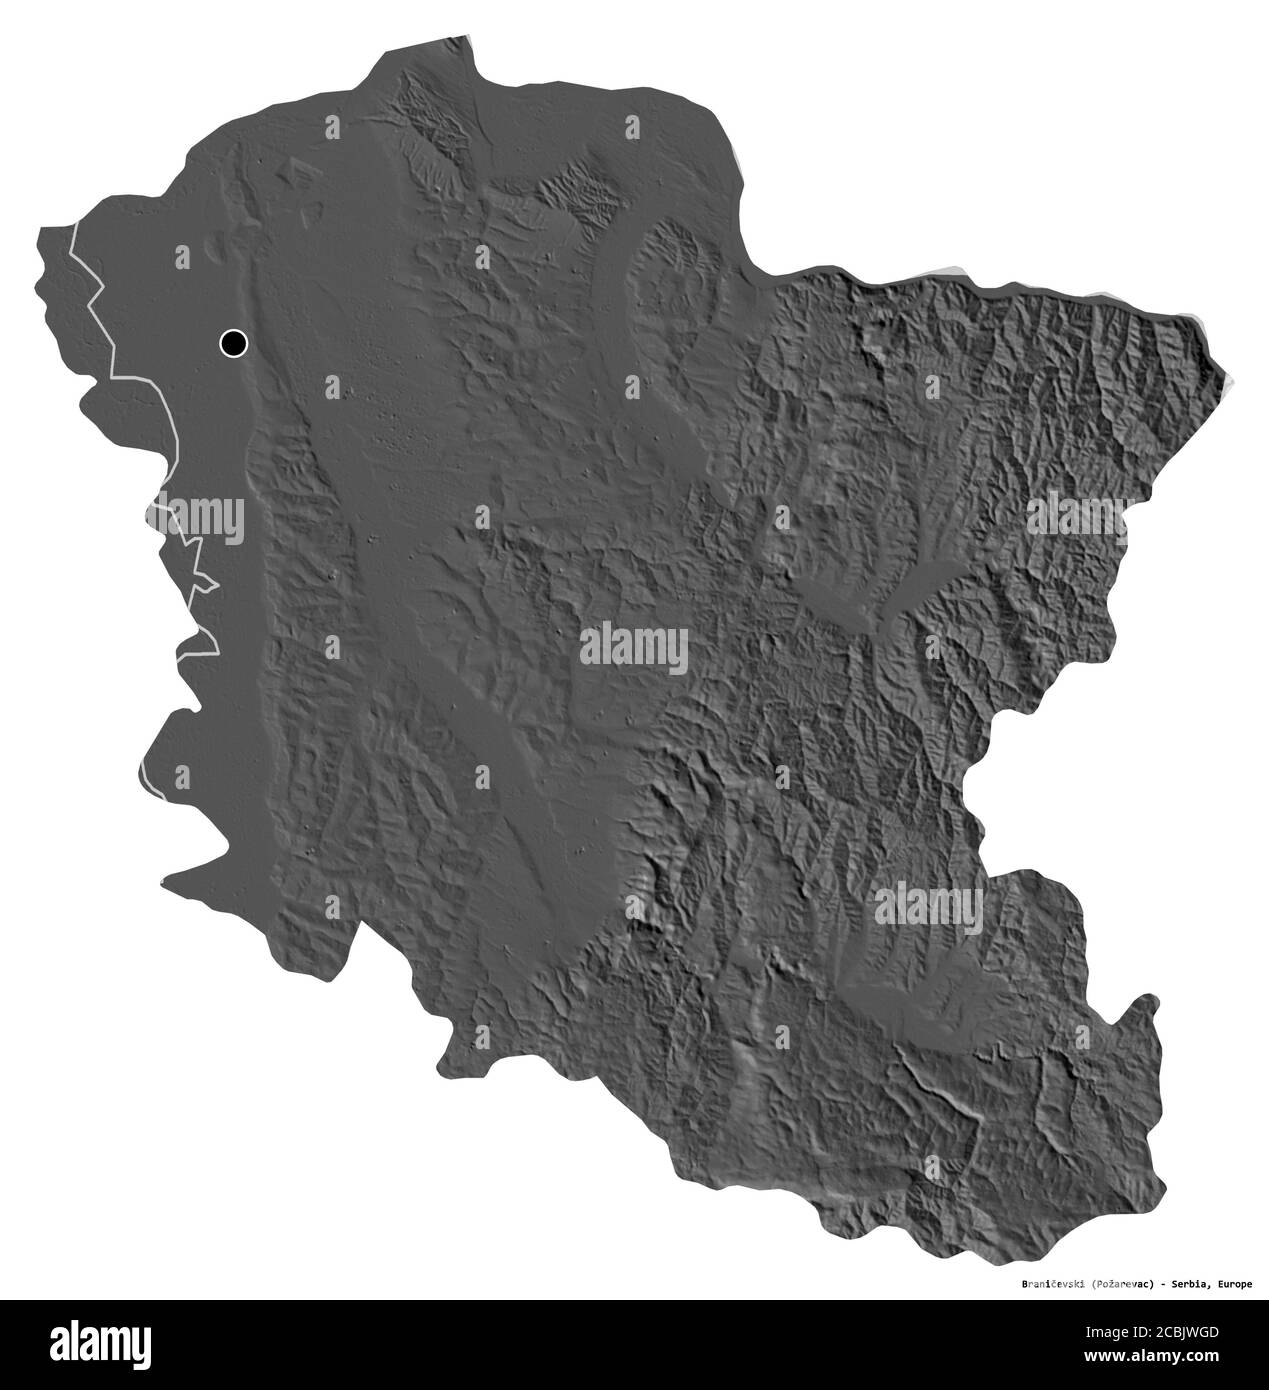 Shape of Braničevski, district of Serbia, with its capital isolated on white background. Bilevel elevation map. 3D rendering Stock Photo